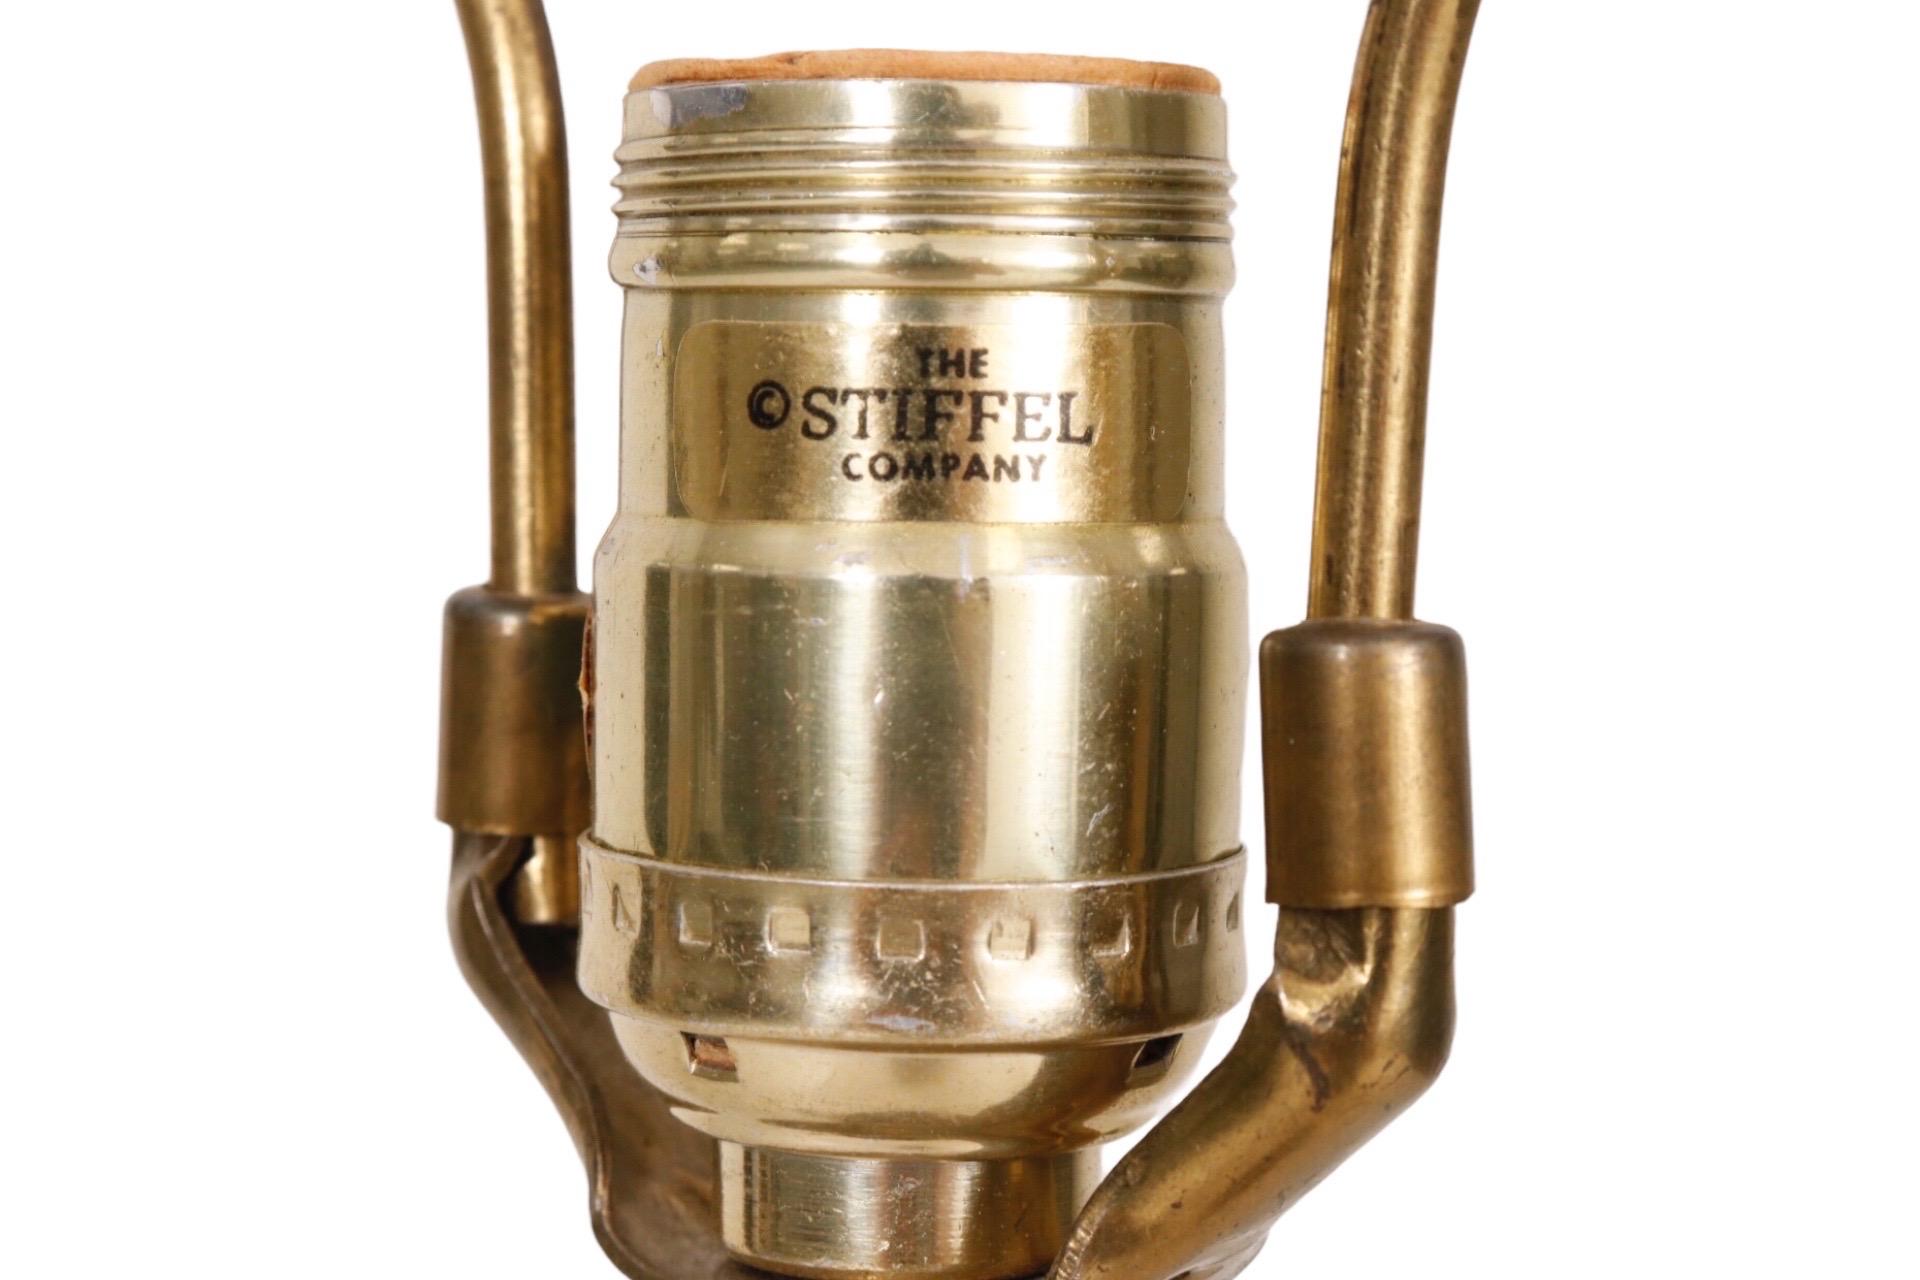 A Stiffel model #5561 table lamp in brass. Cast in a trophy style with curled acanthus leaves above a fluted urn. The small on-off rotary knob is on the base which is cast to give the look of being heavily turned. The Stiffel label can be seen on